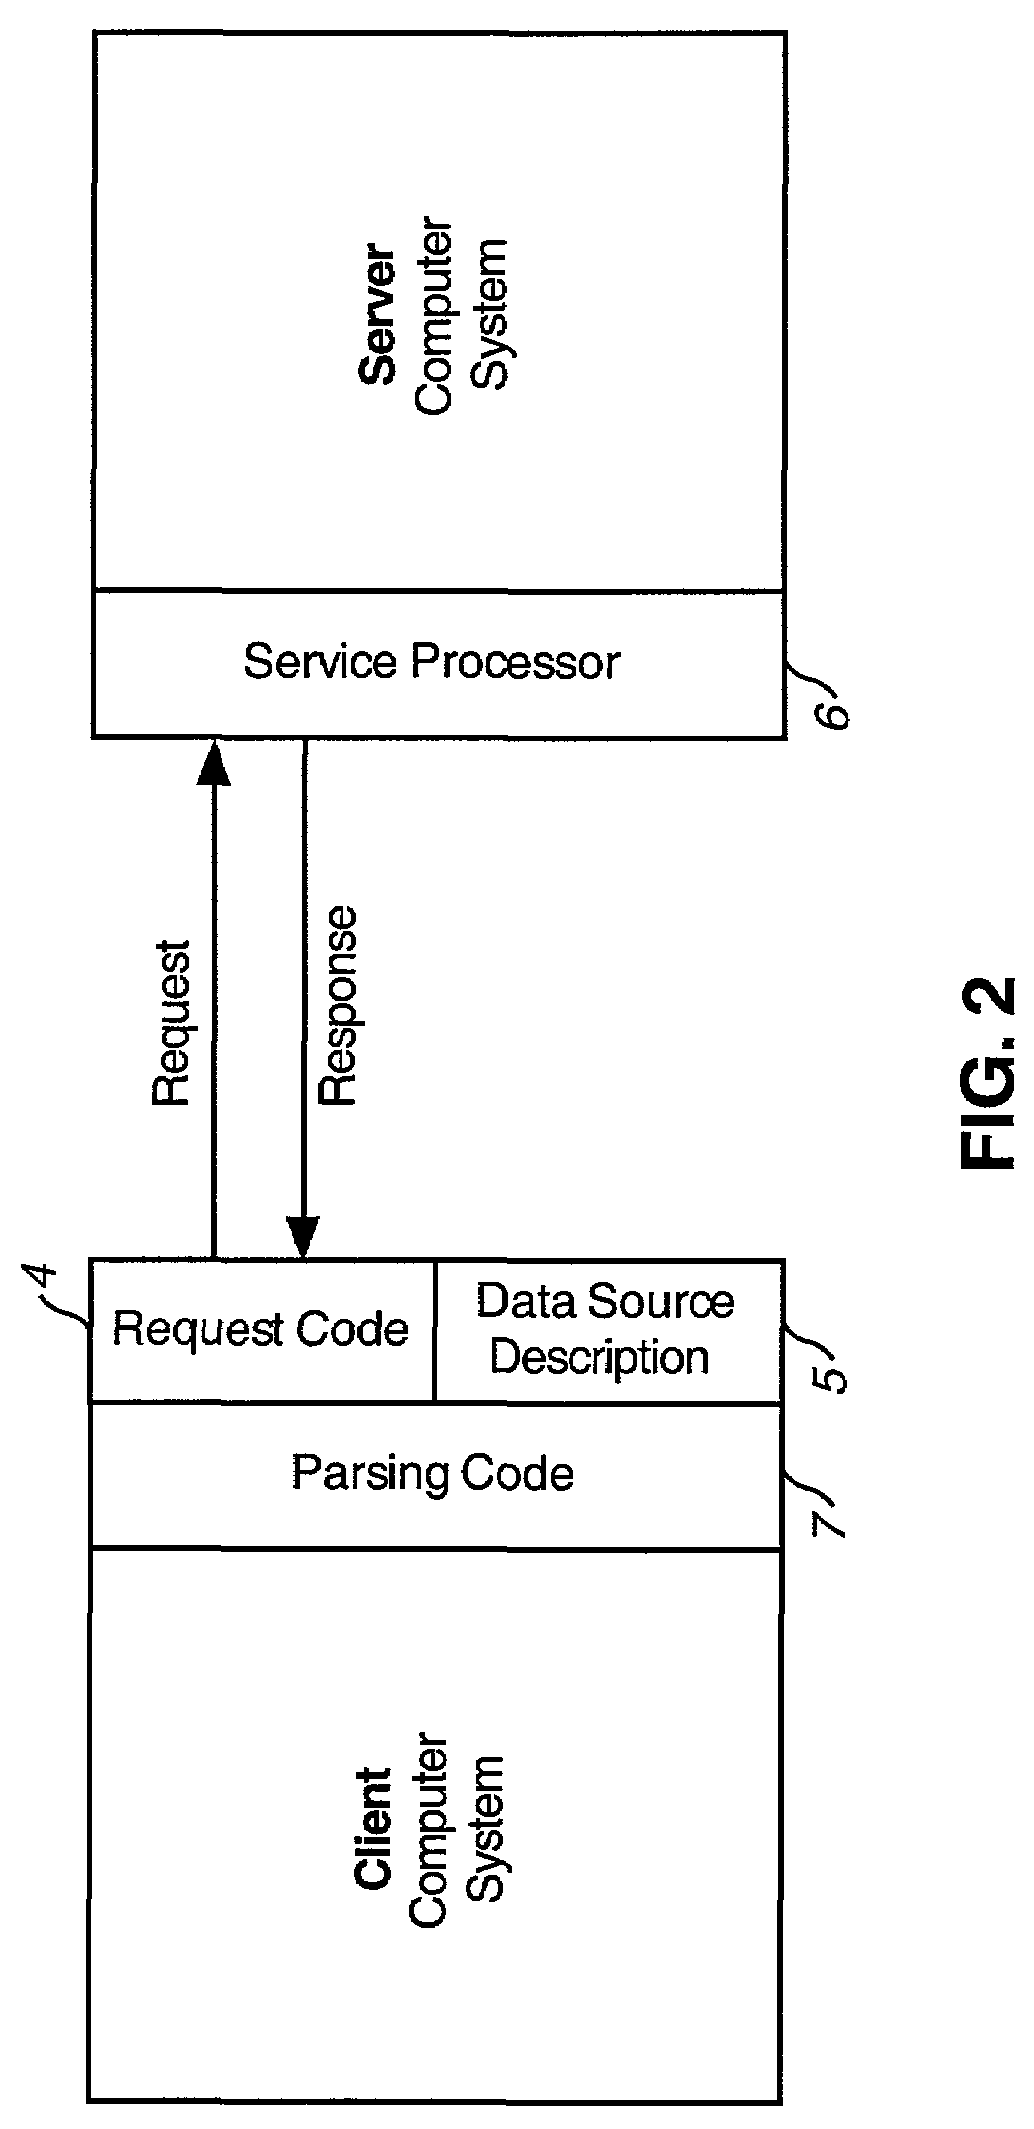 Dynamic, hierarchical data exchange system